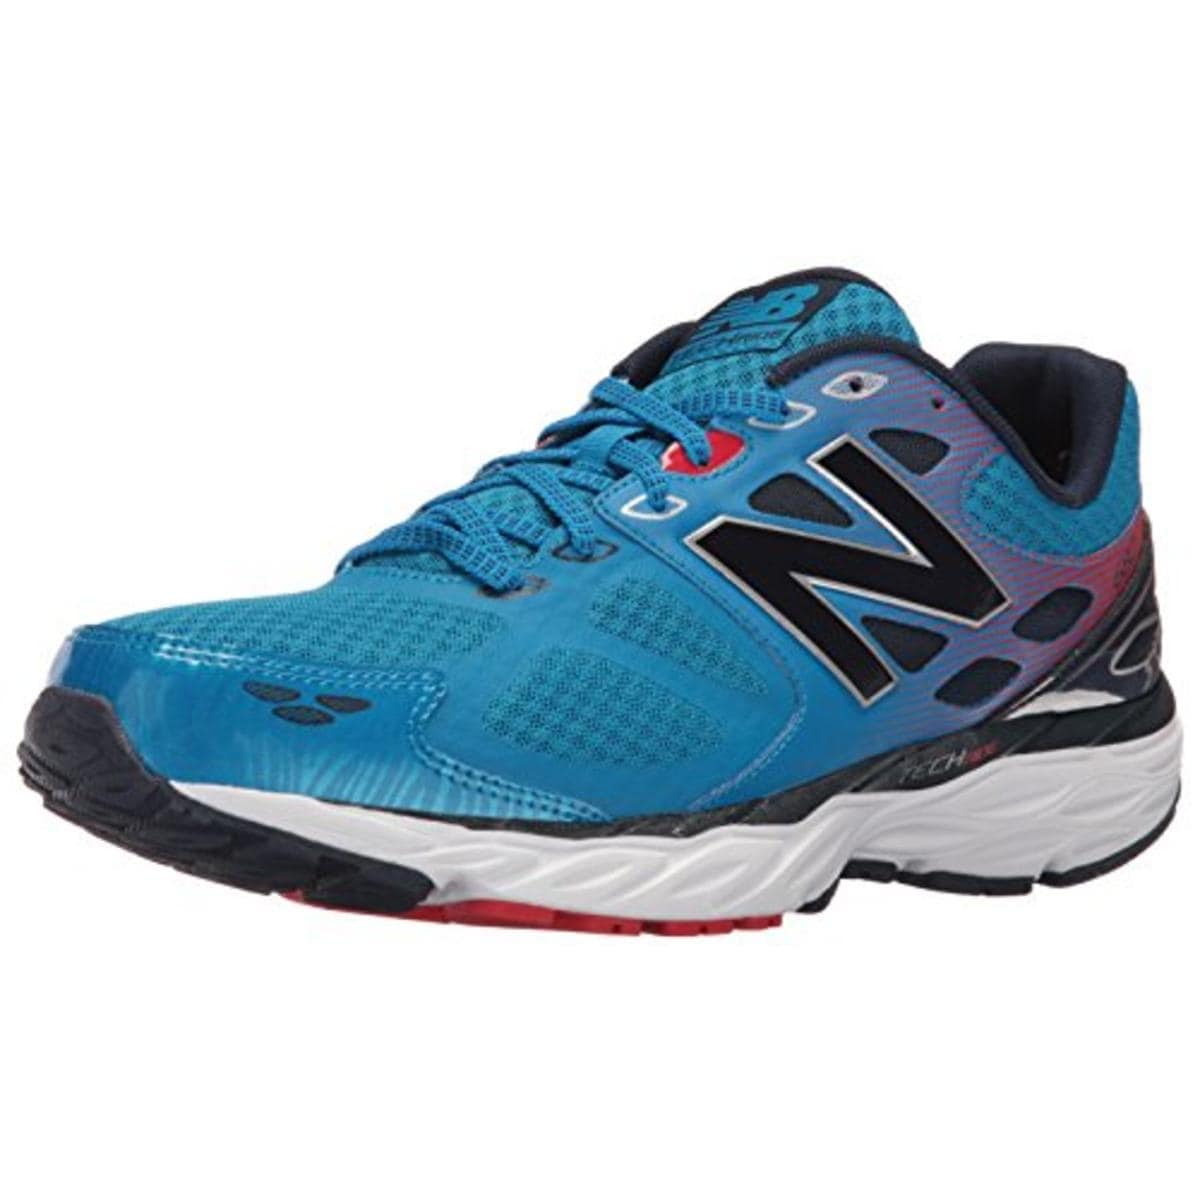 new balance 680 v3 mens Online Shopping mall | Find the best ...